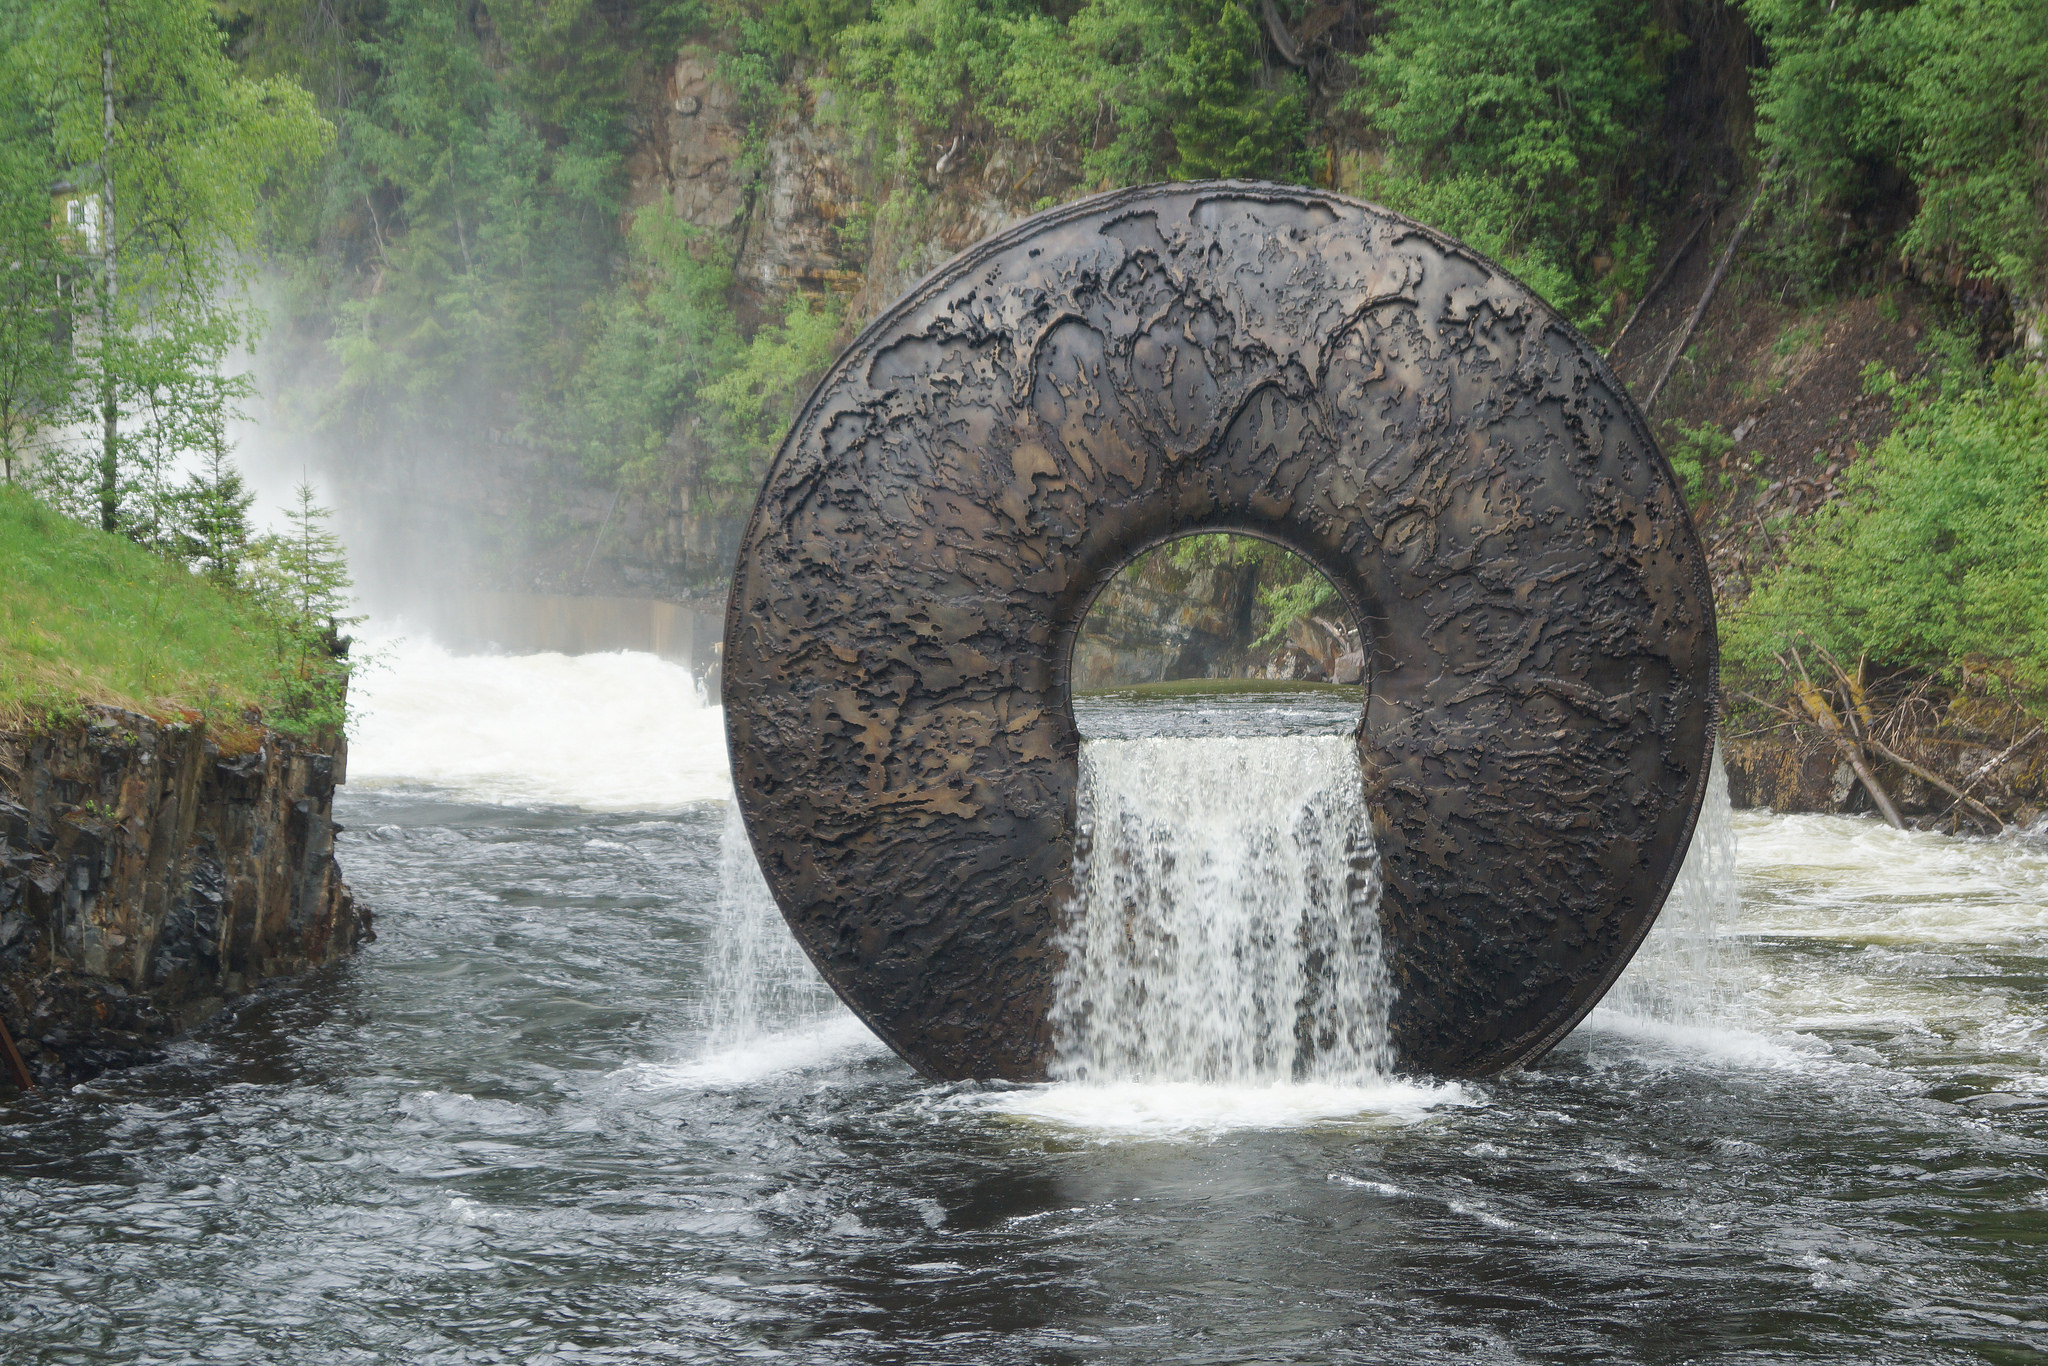 “All of Nature Flows Through Us” by Marc Quinn .From Kistefos Museum - The Sculpture Park. Photo: Randi Hausken (CC BY-SA 2.0)